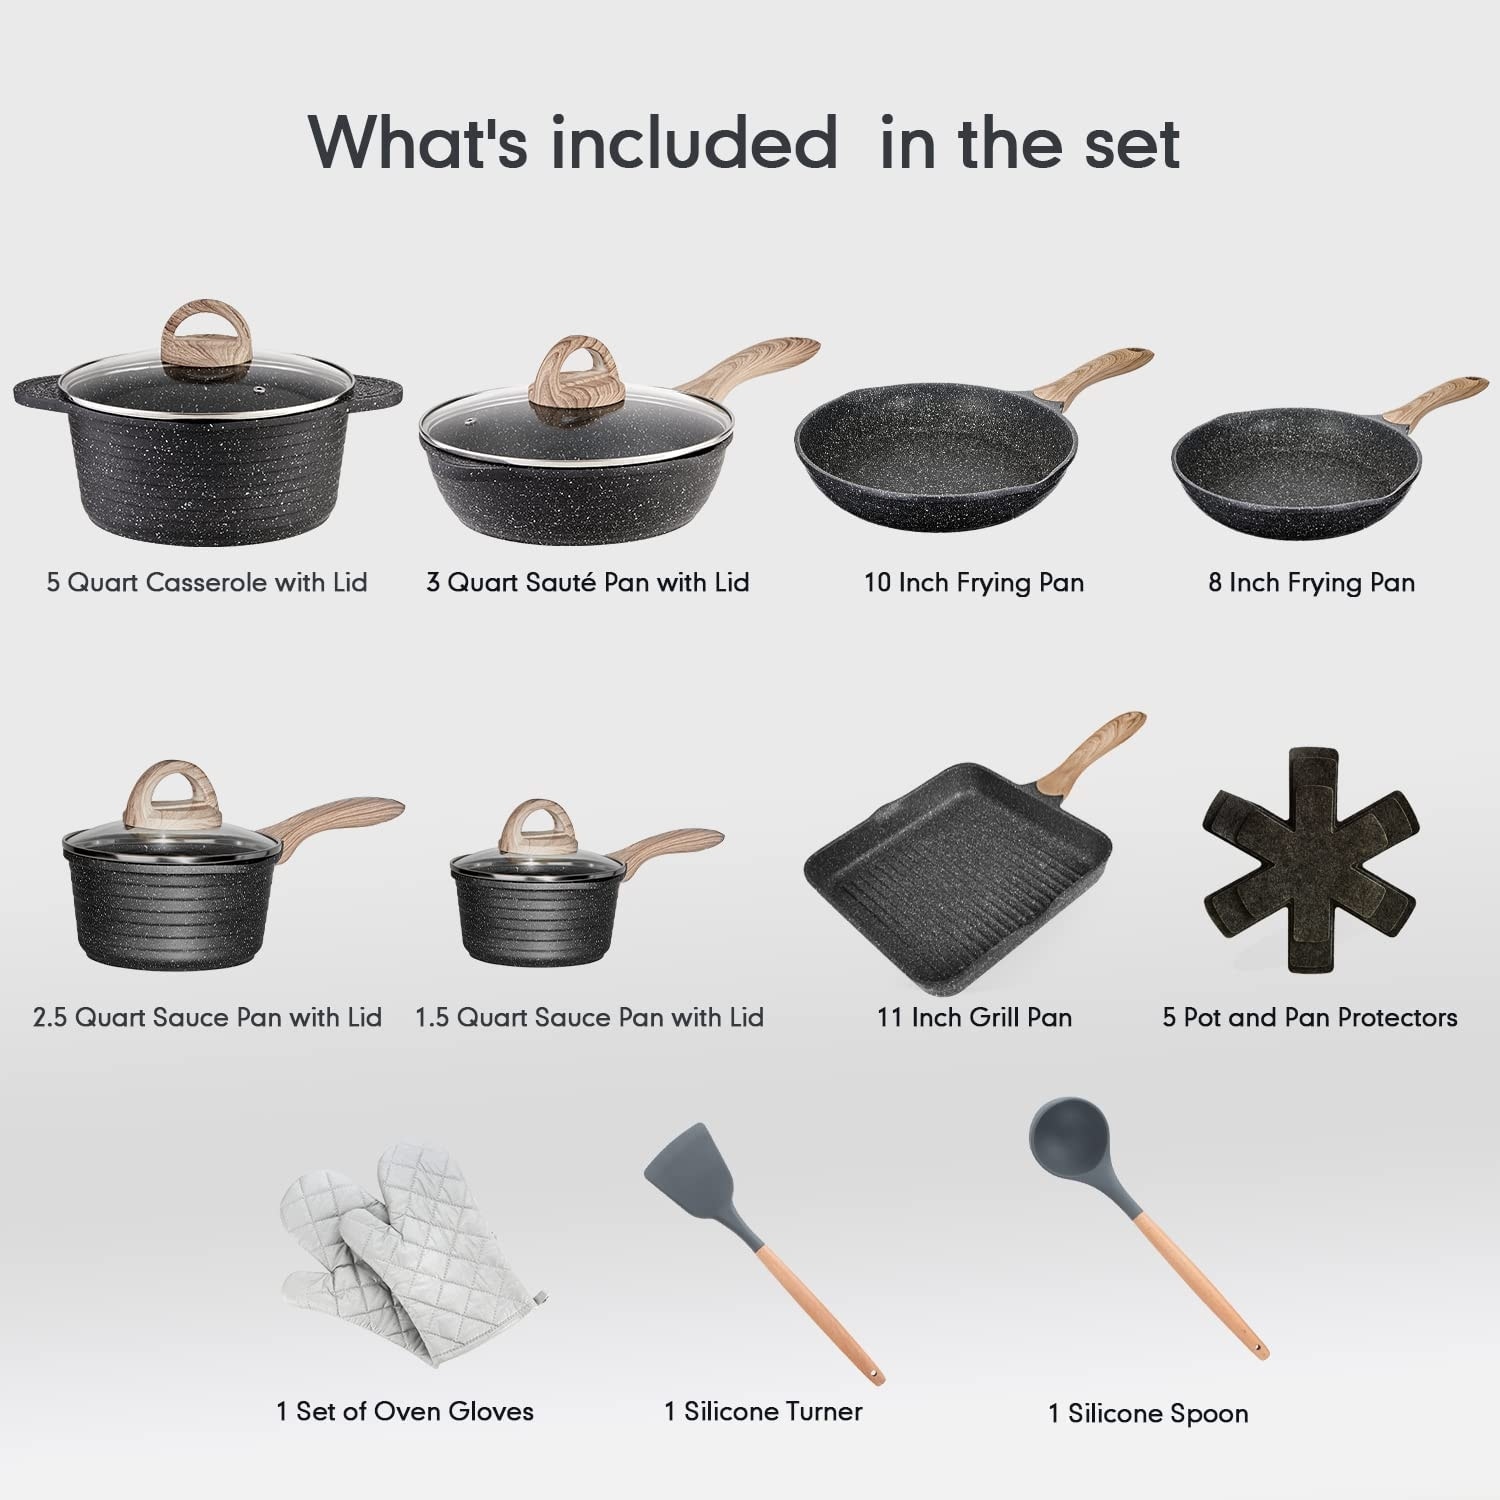 https://ak1.ostkcdn.com/images/products/is/images/direct/8c8d3c382f23b26b77f6af235c8a23ddbd1957fa/Pots-and-Pans-Set-Nonstick-20PCS%2C-Granite-Coating-Cookware-Sets-Induction-Compatible-with-Frying-Pan.jpg